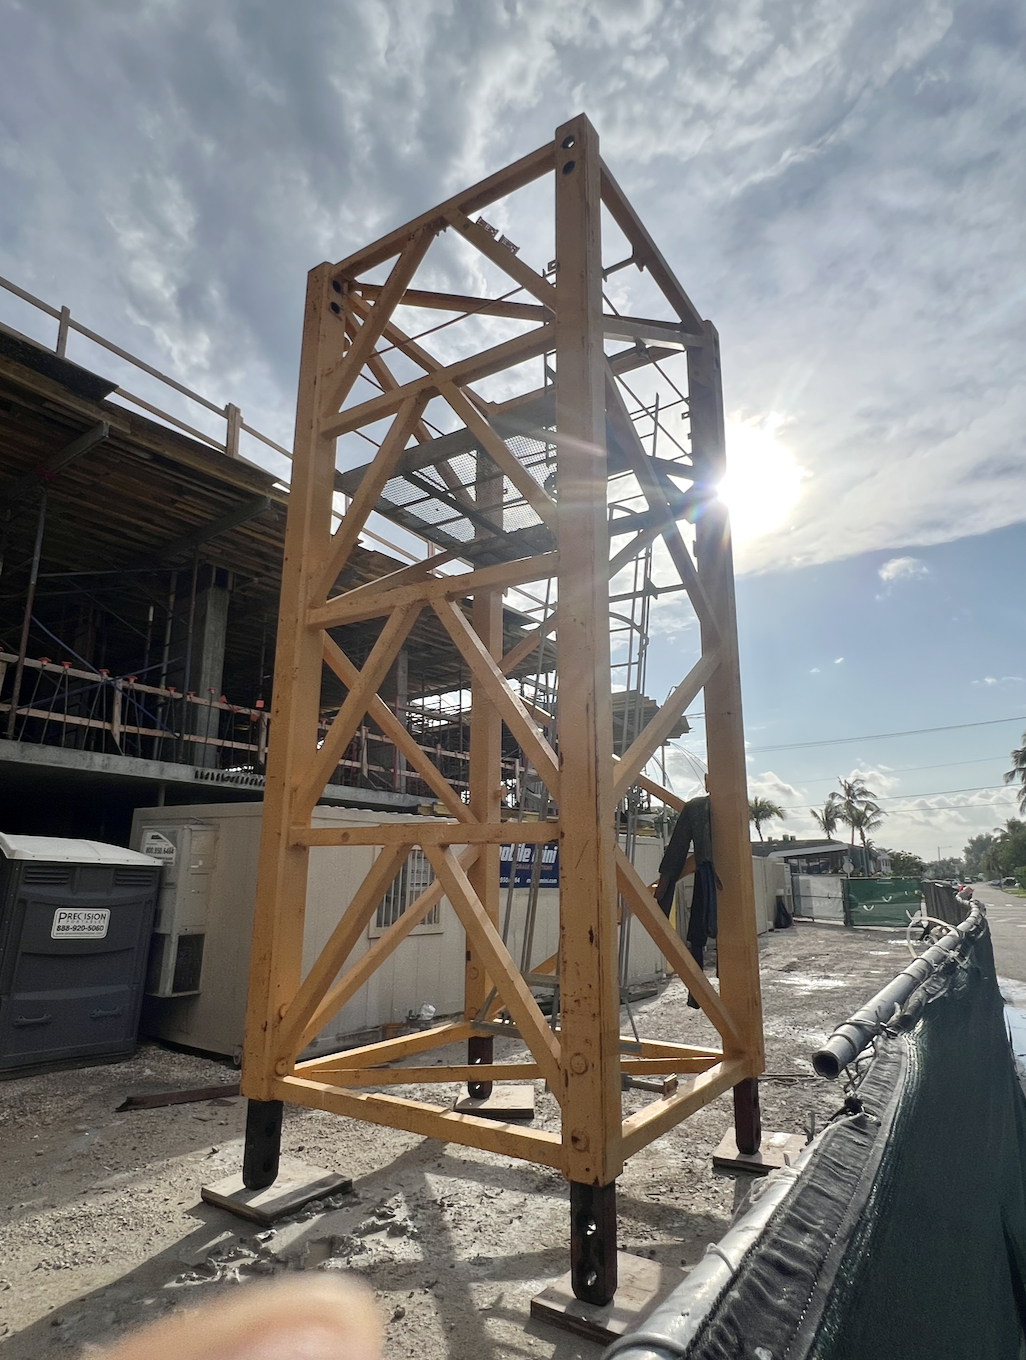 united robotic systems 2024 Modern and contemporary 3d printed home large front window / door for concrete printing Maimi style house utilizing a generative AI software by United Robotic Systems Miami Beach Based Technology start up company set to break ground on April 20, 2024, disrupting the construction industry with robots. 3, 90 degree angle wall and one round corner for aesthetic pleasing views interior and exterior architect front face. united robotic systems house, a minor